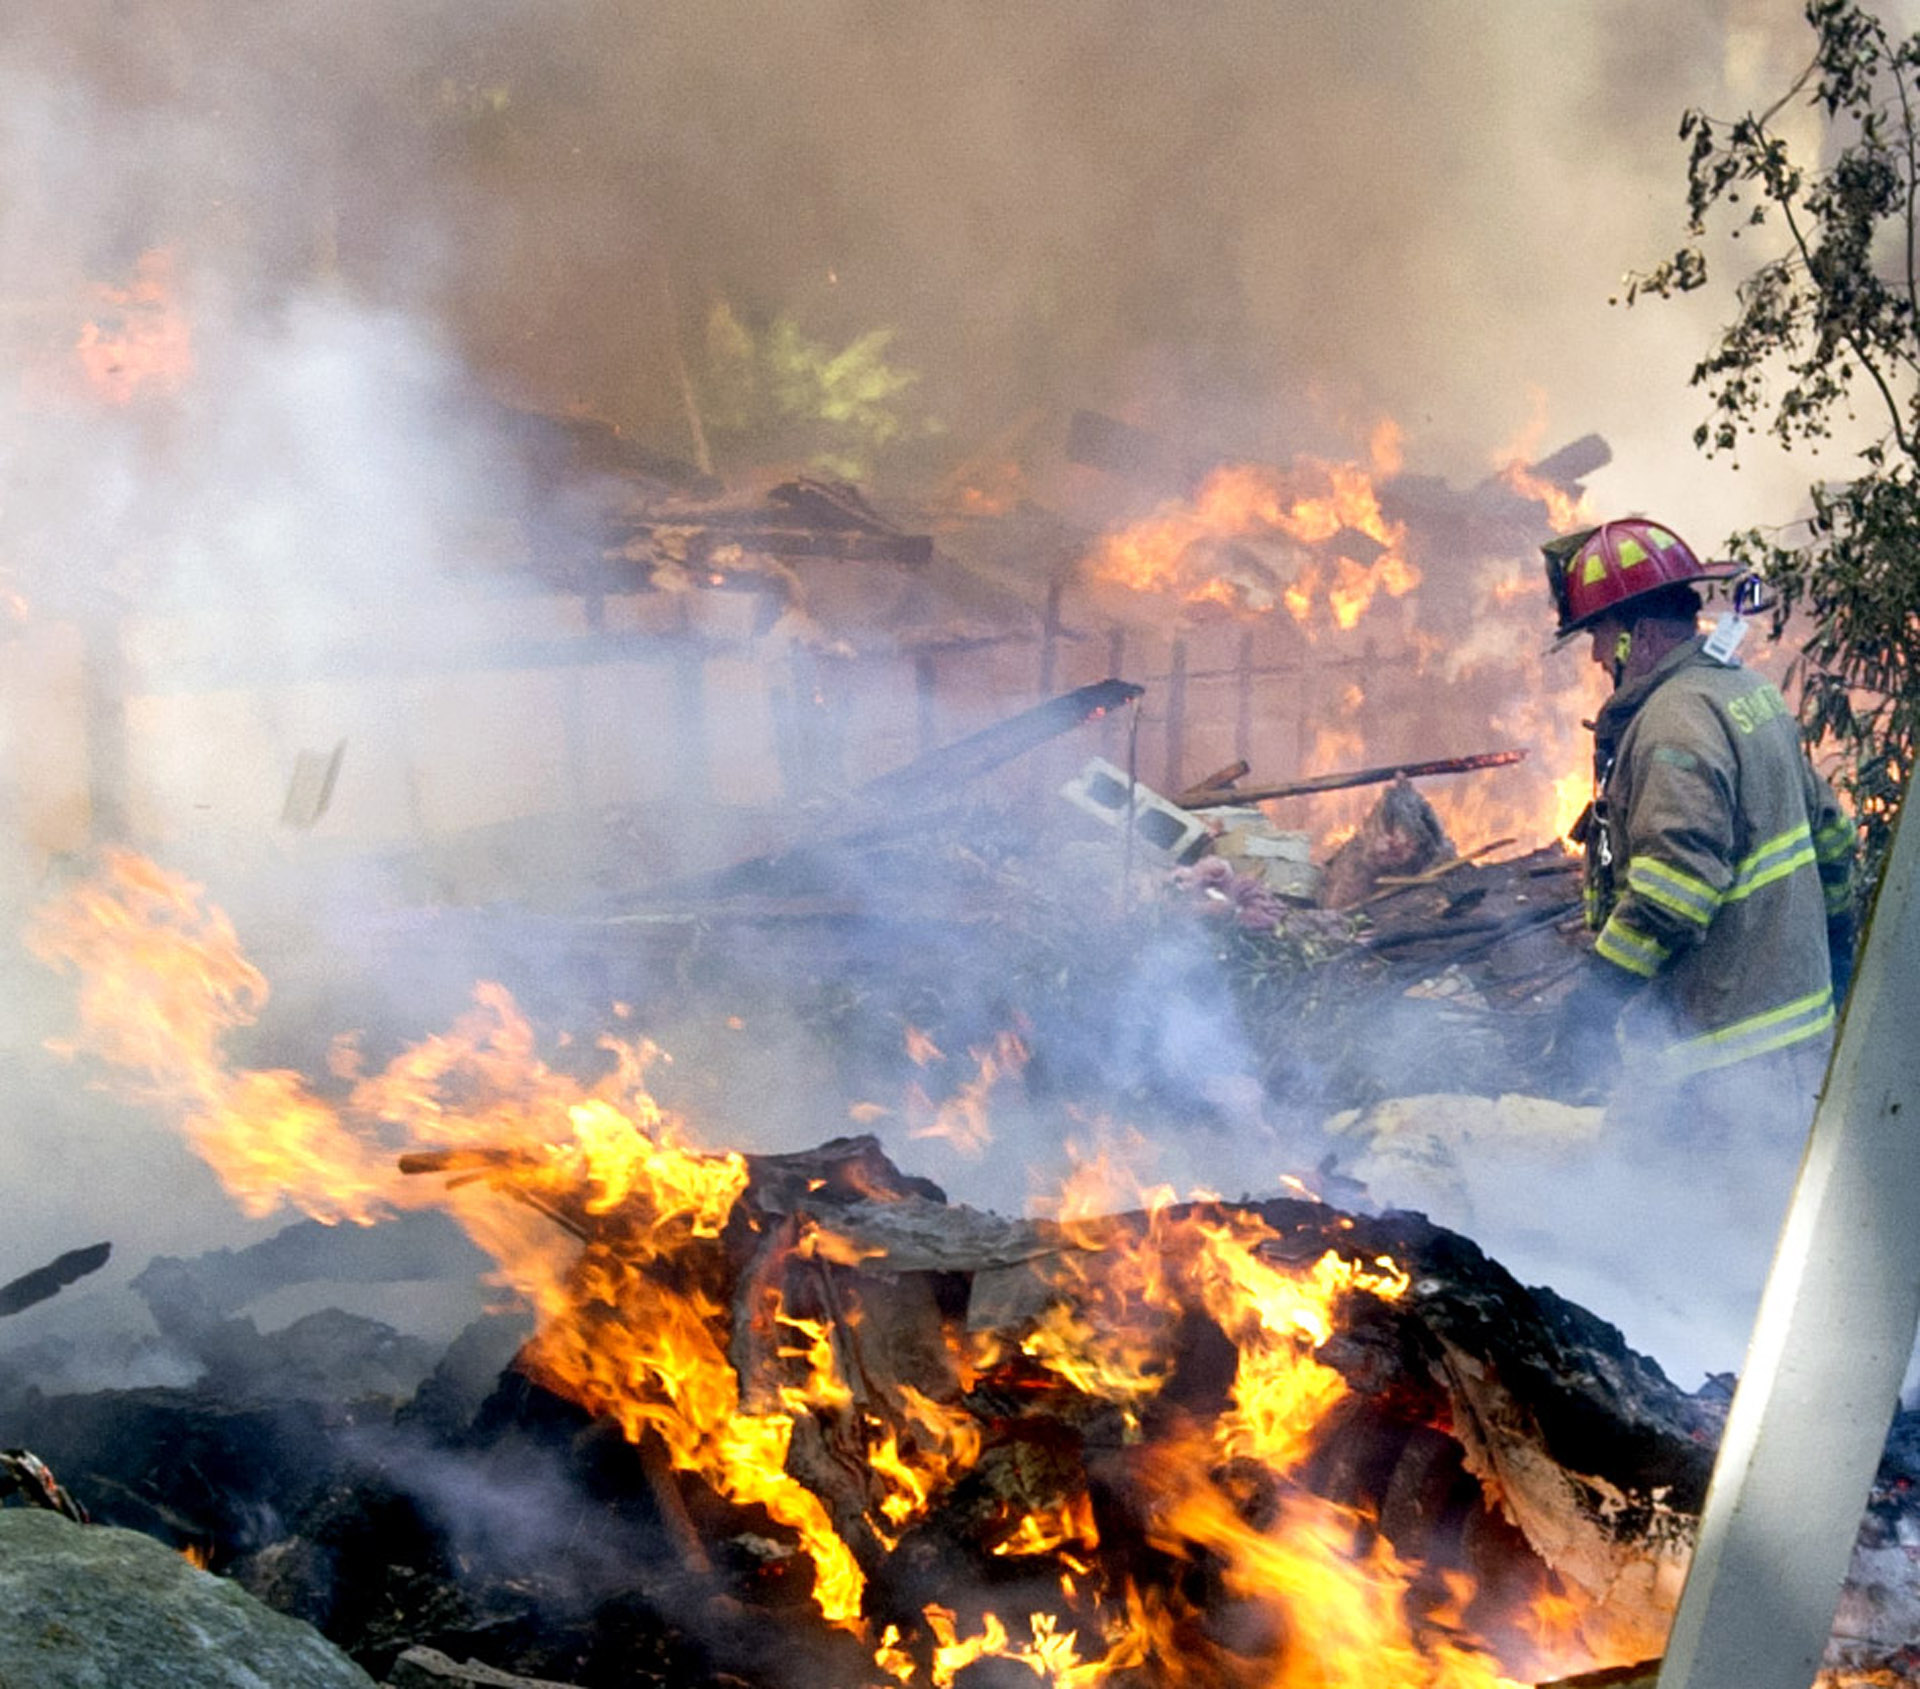  A firefighter walks through the burning rubble of 305 Webbs Hill Road in Stamford, Conn., where the home exploded on Tuesday, Sept. 17, 2013. 